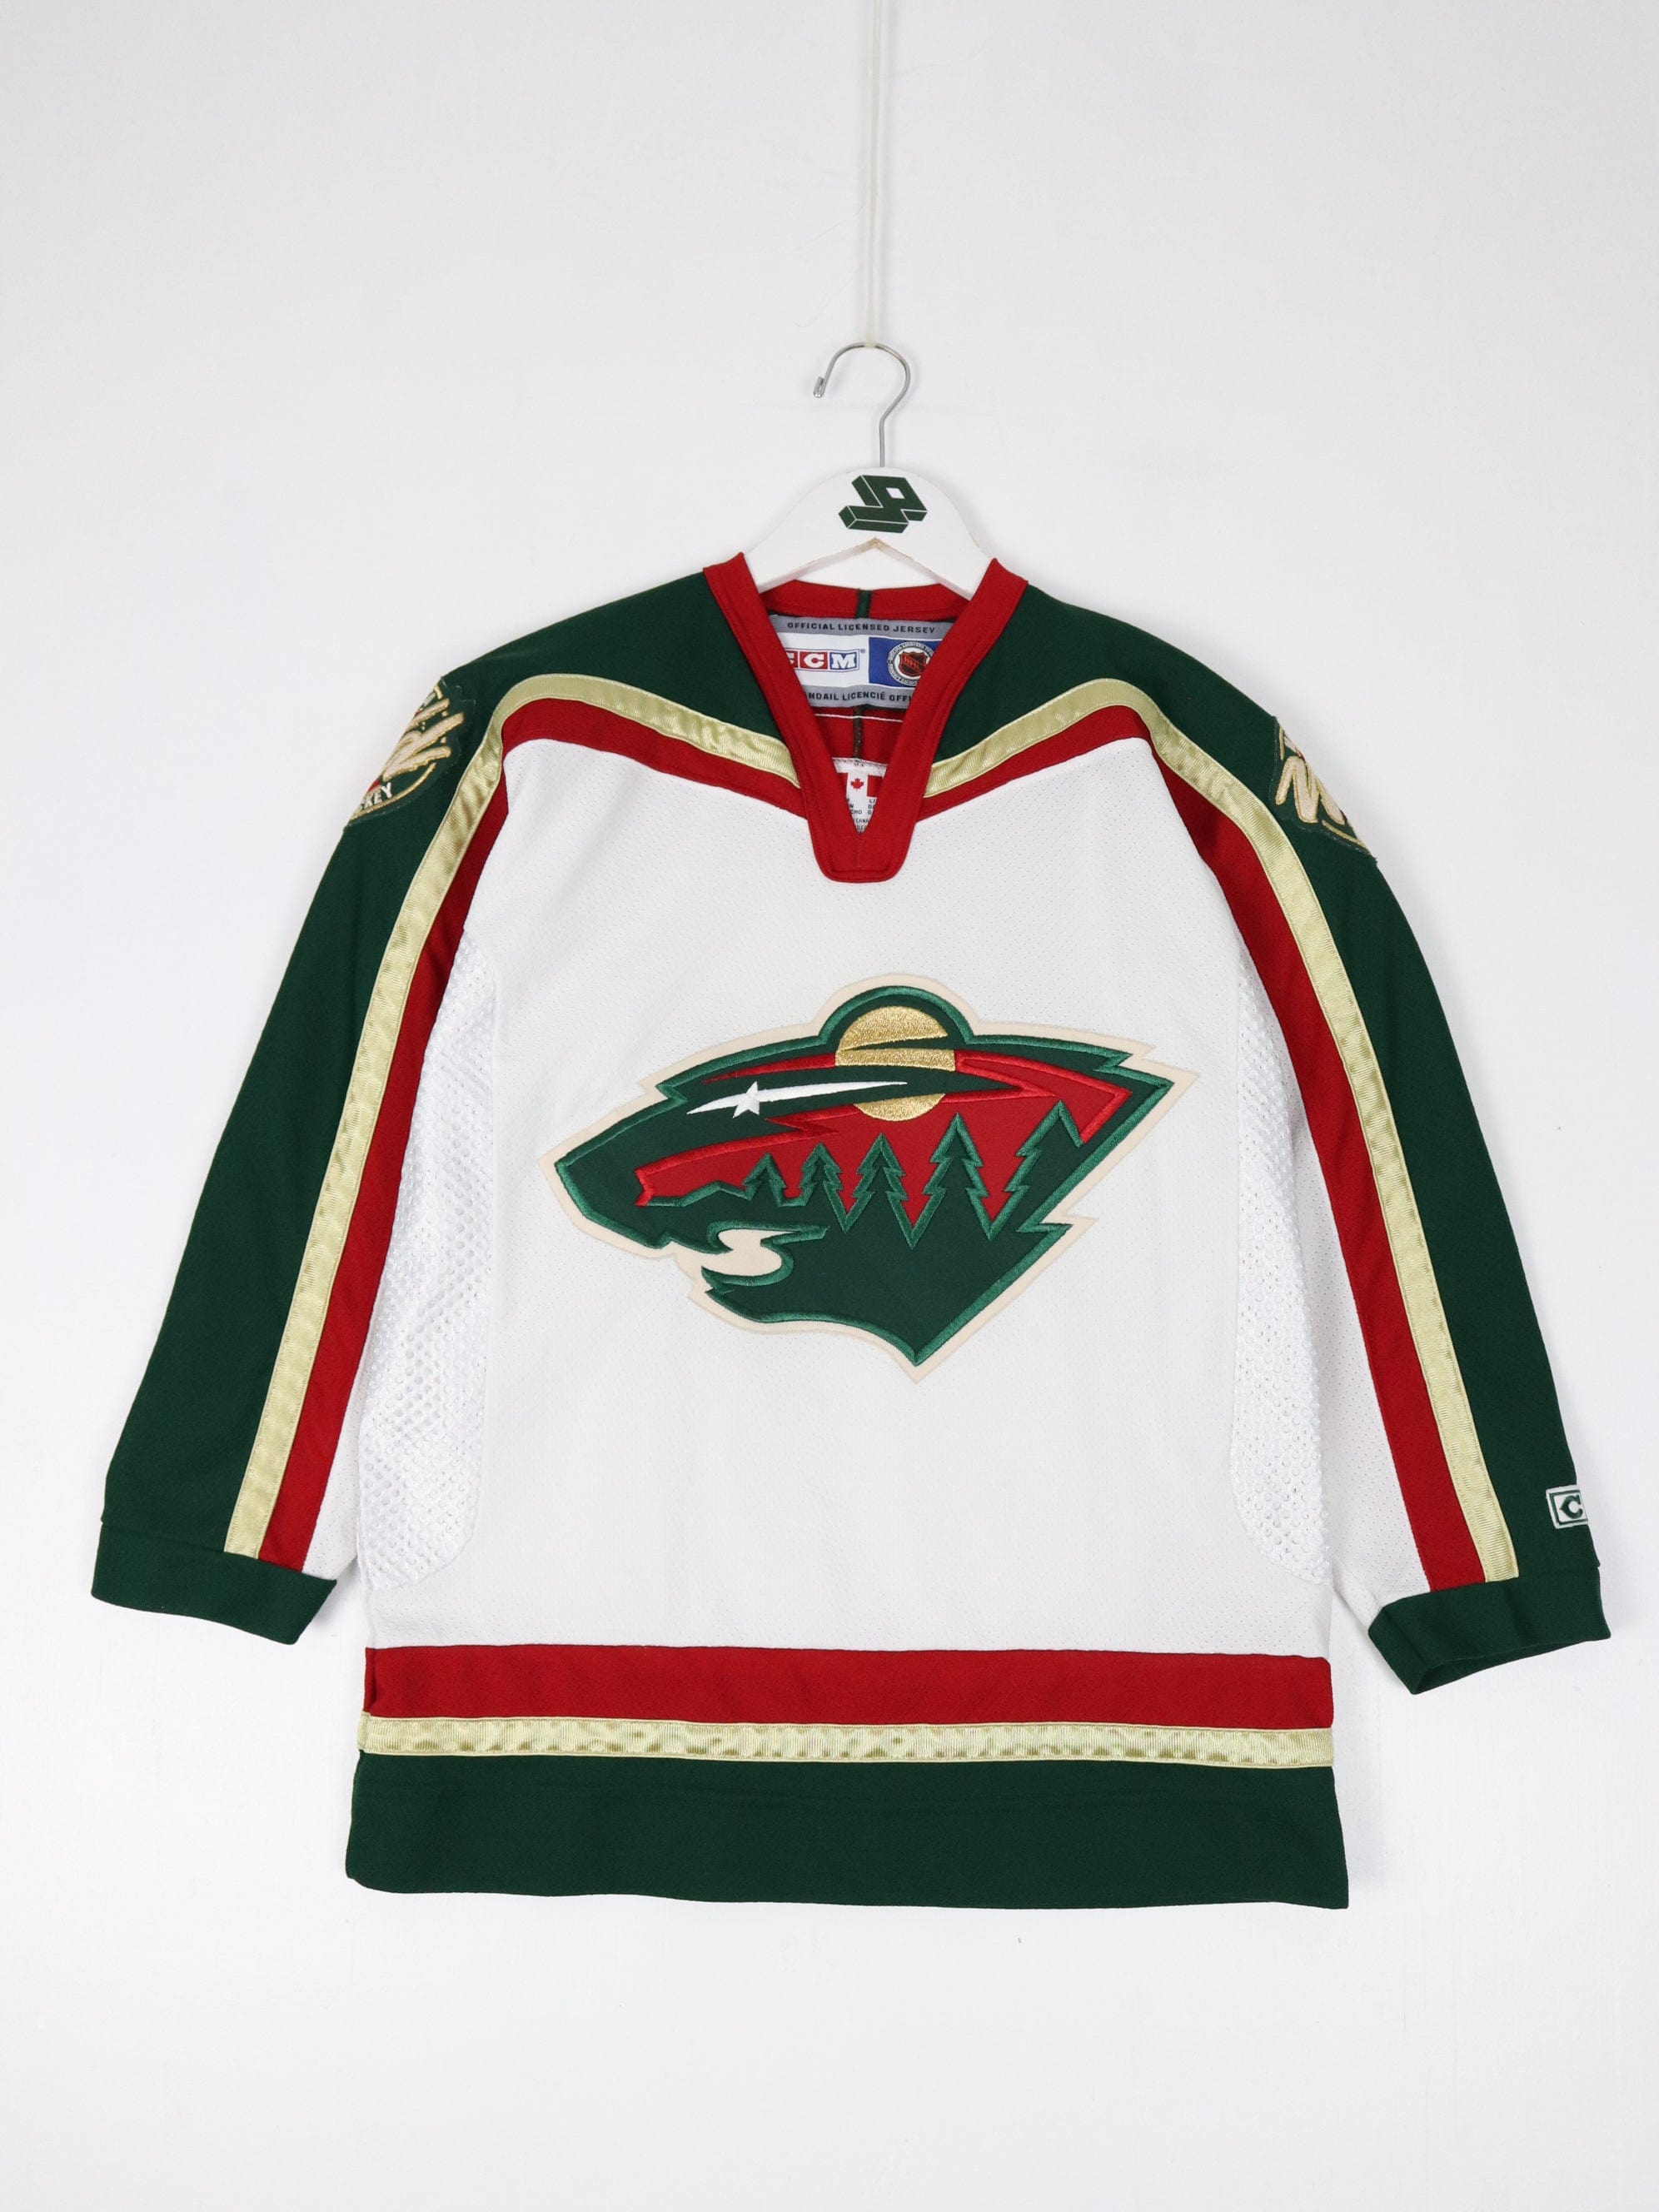 Pre owned Minnesota Wild jersey size 52